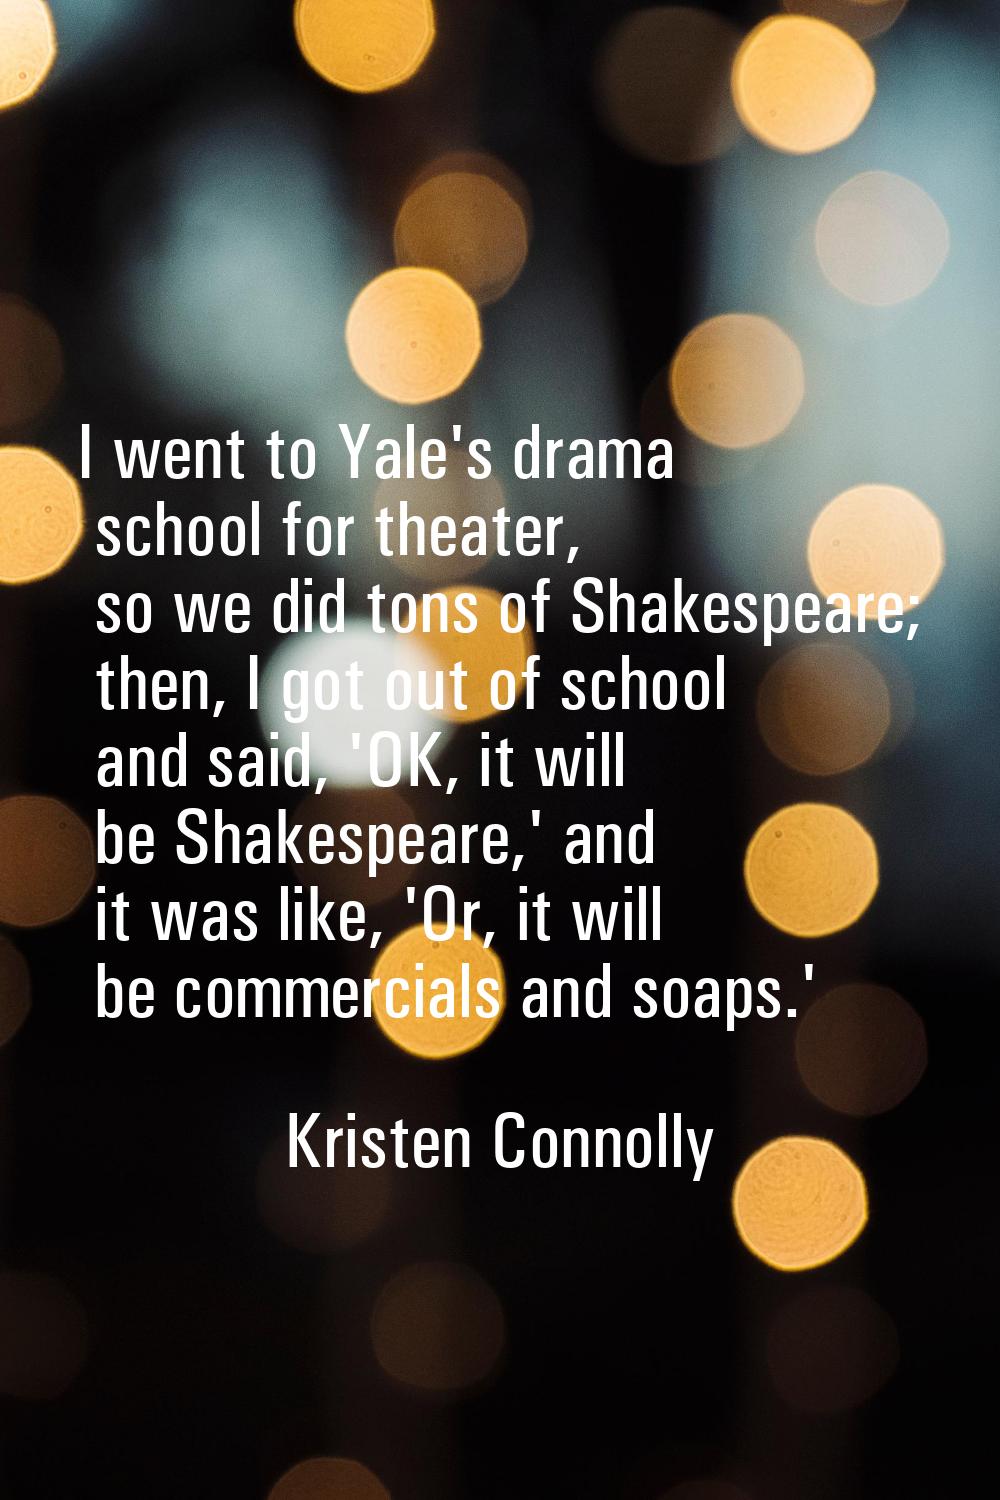 I went to Yale's drama school for theater, so we did tons of Shakespeare; then, I got out of school